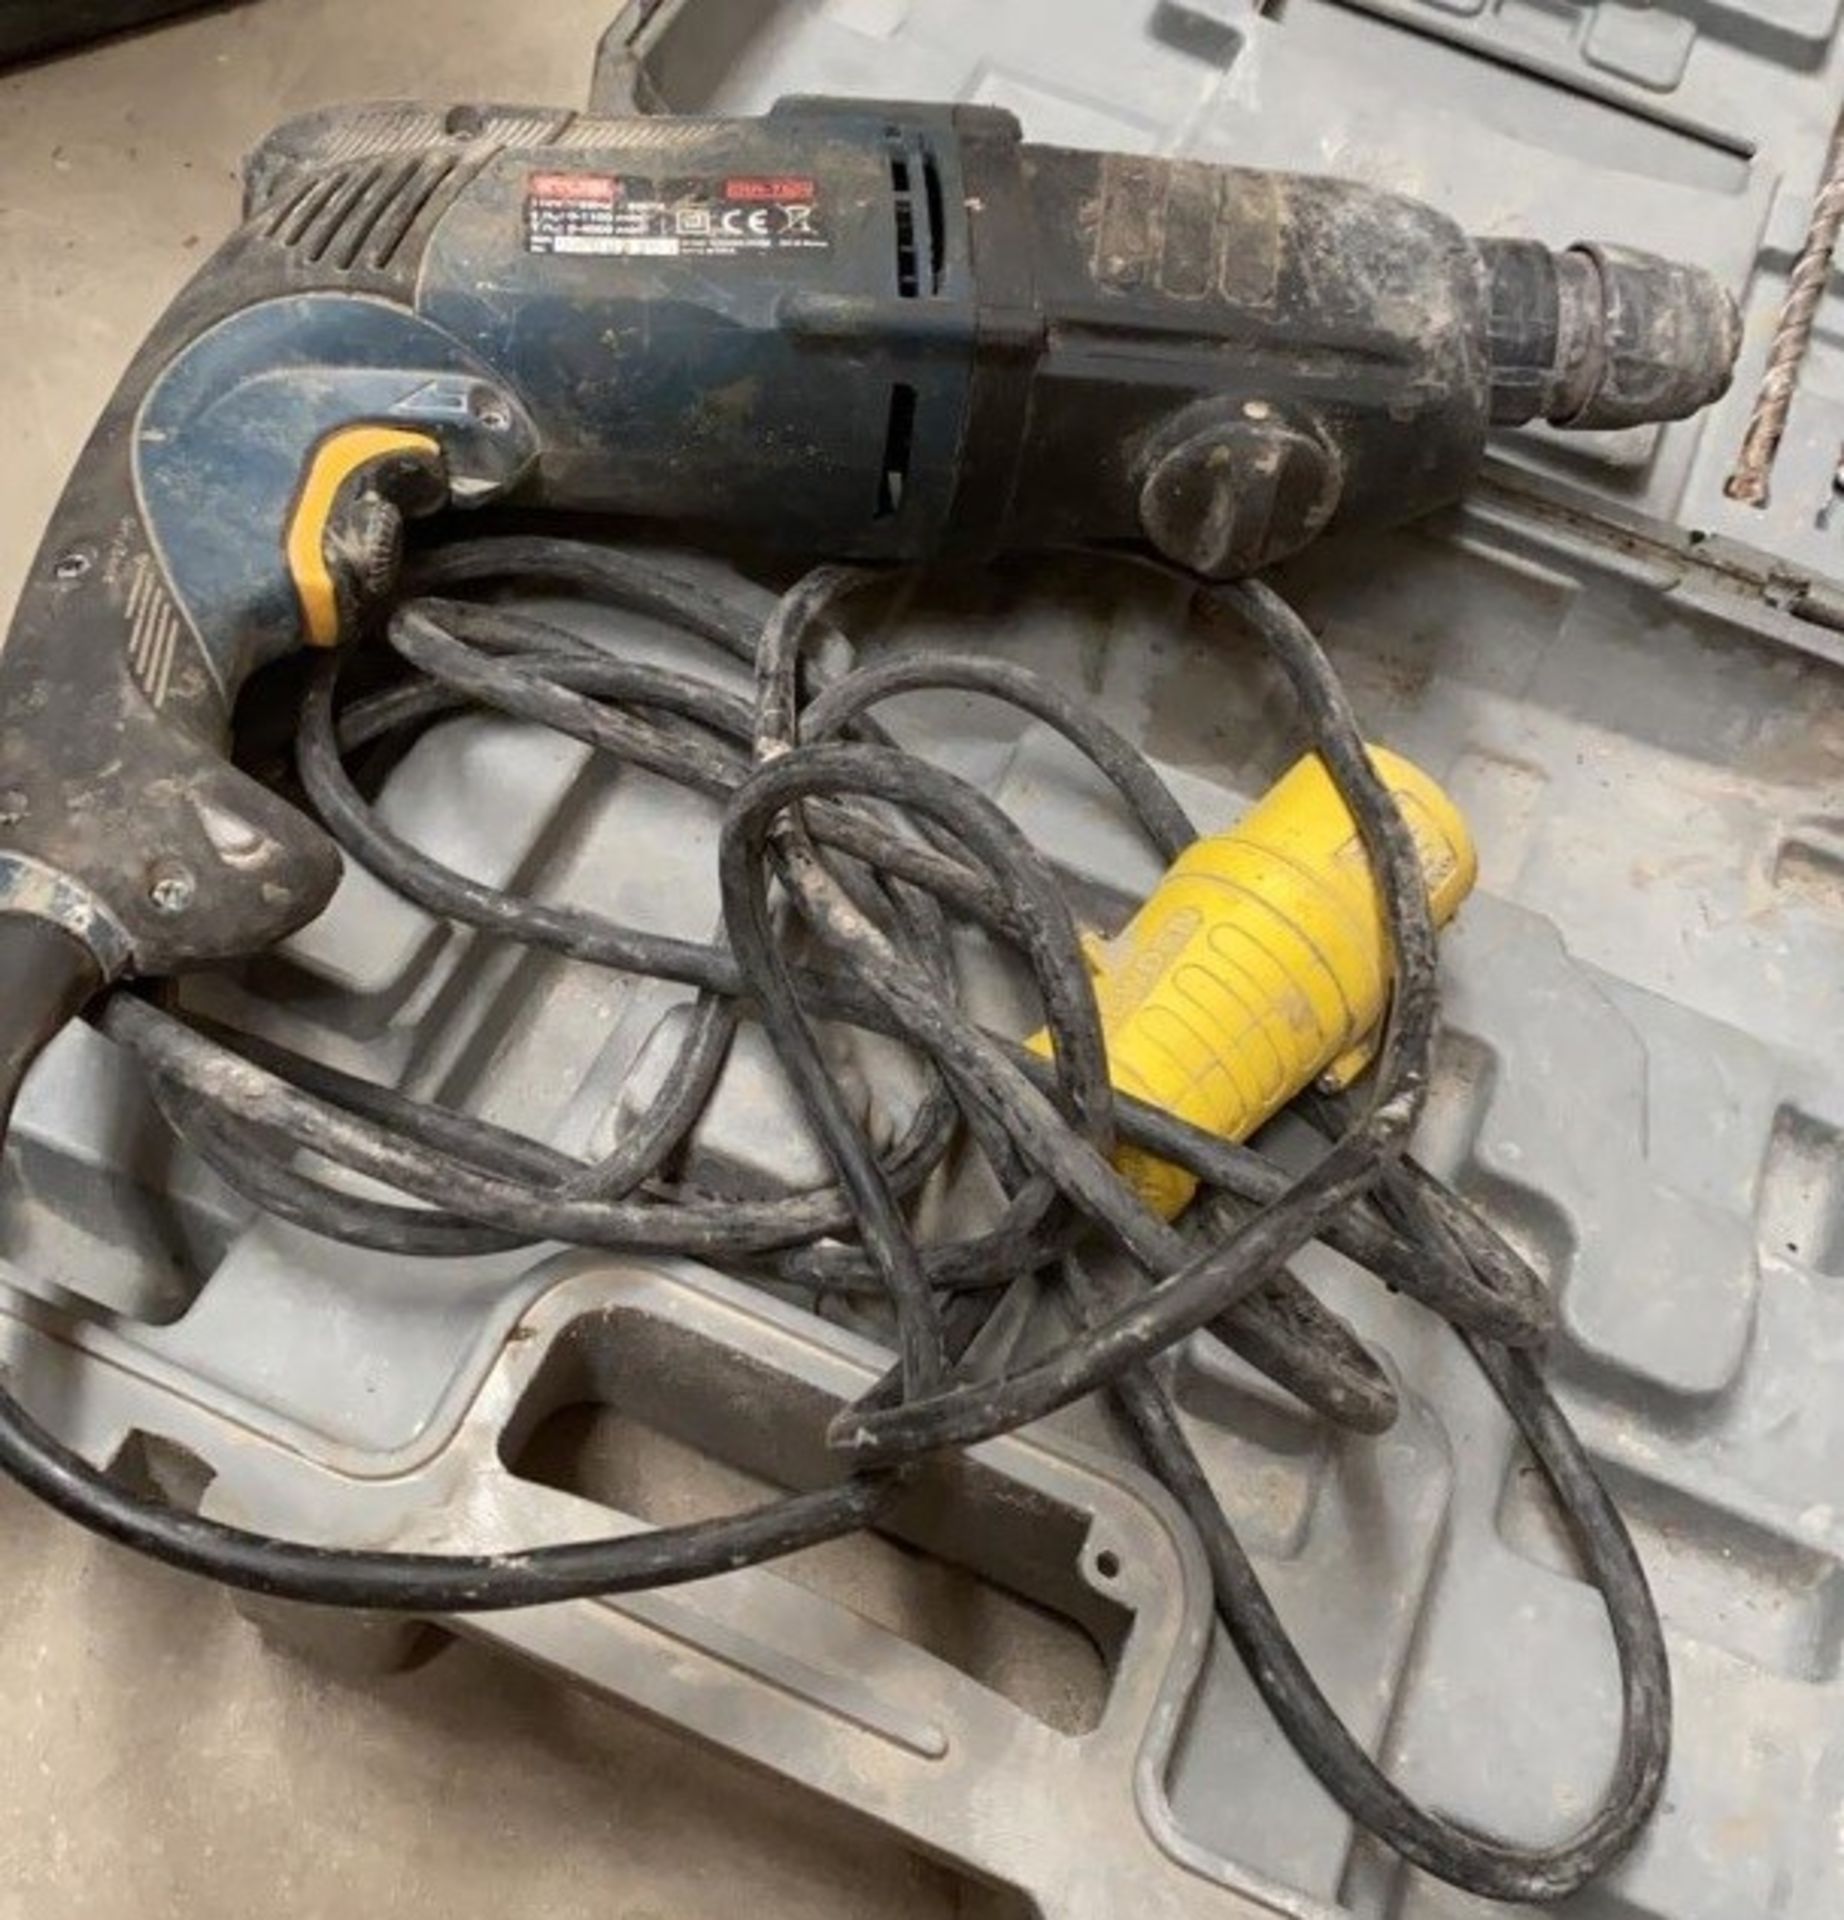 1 x Ryobi 110V Impact Drill - Used, Recently Removed From A Working Site - CL505 - Ref: TL027 - - Image 3 of 5